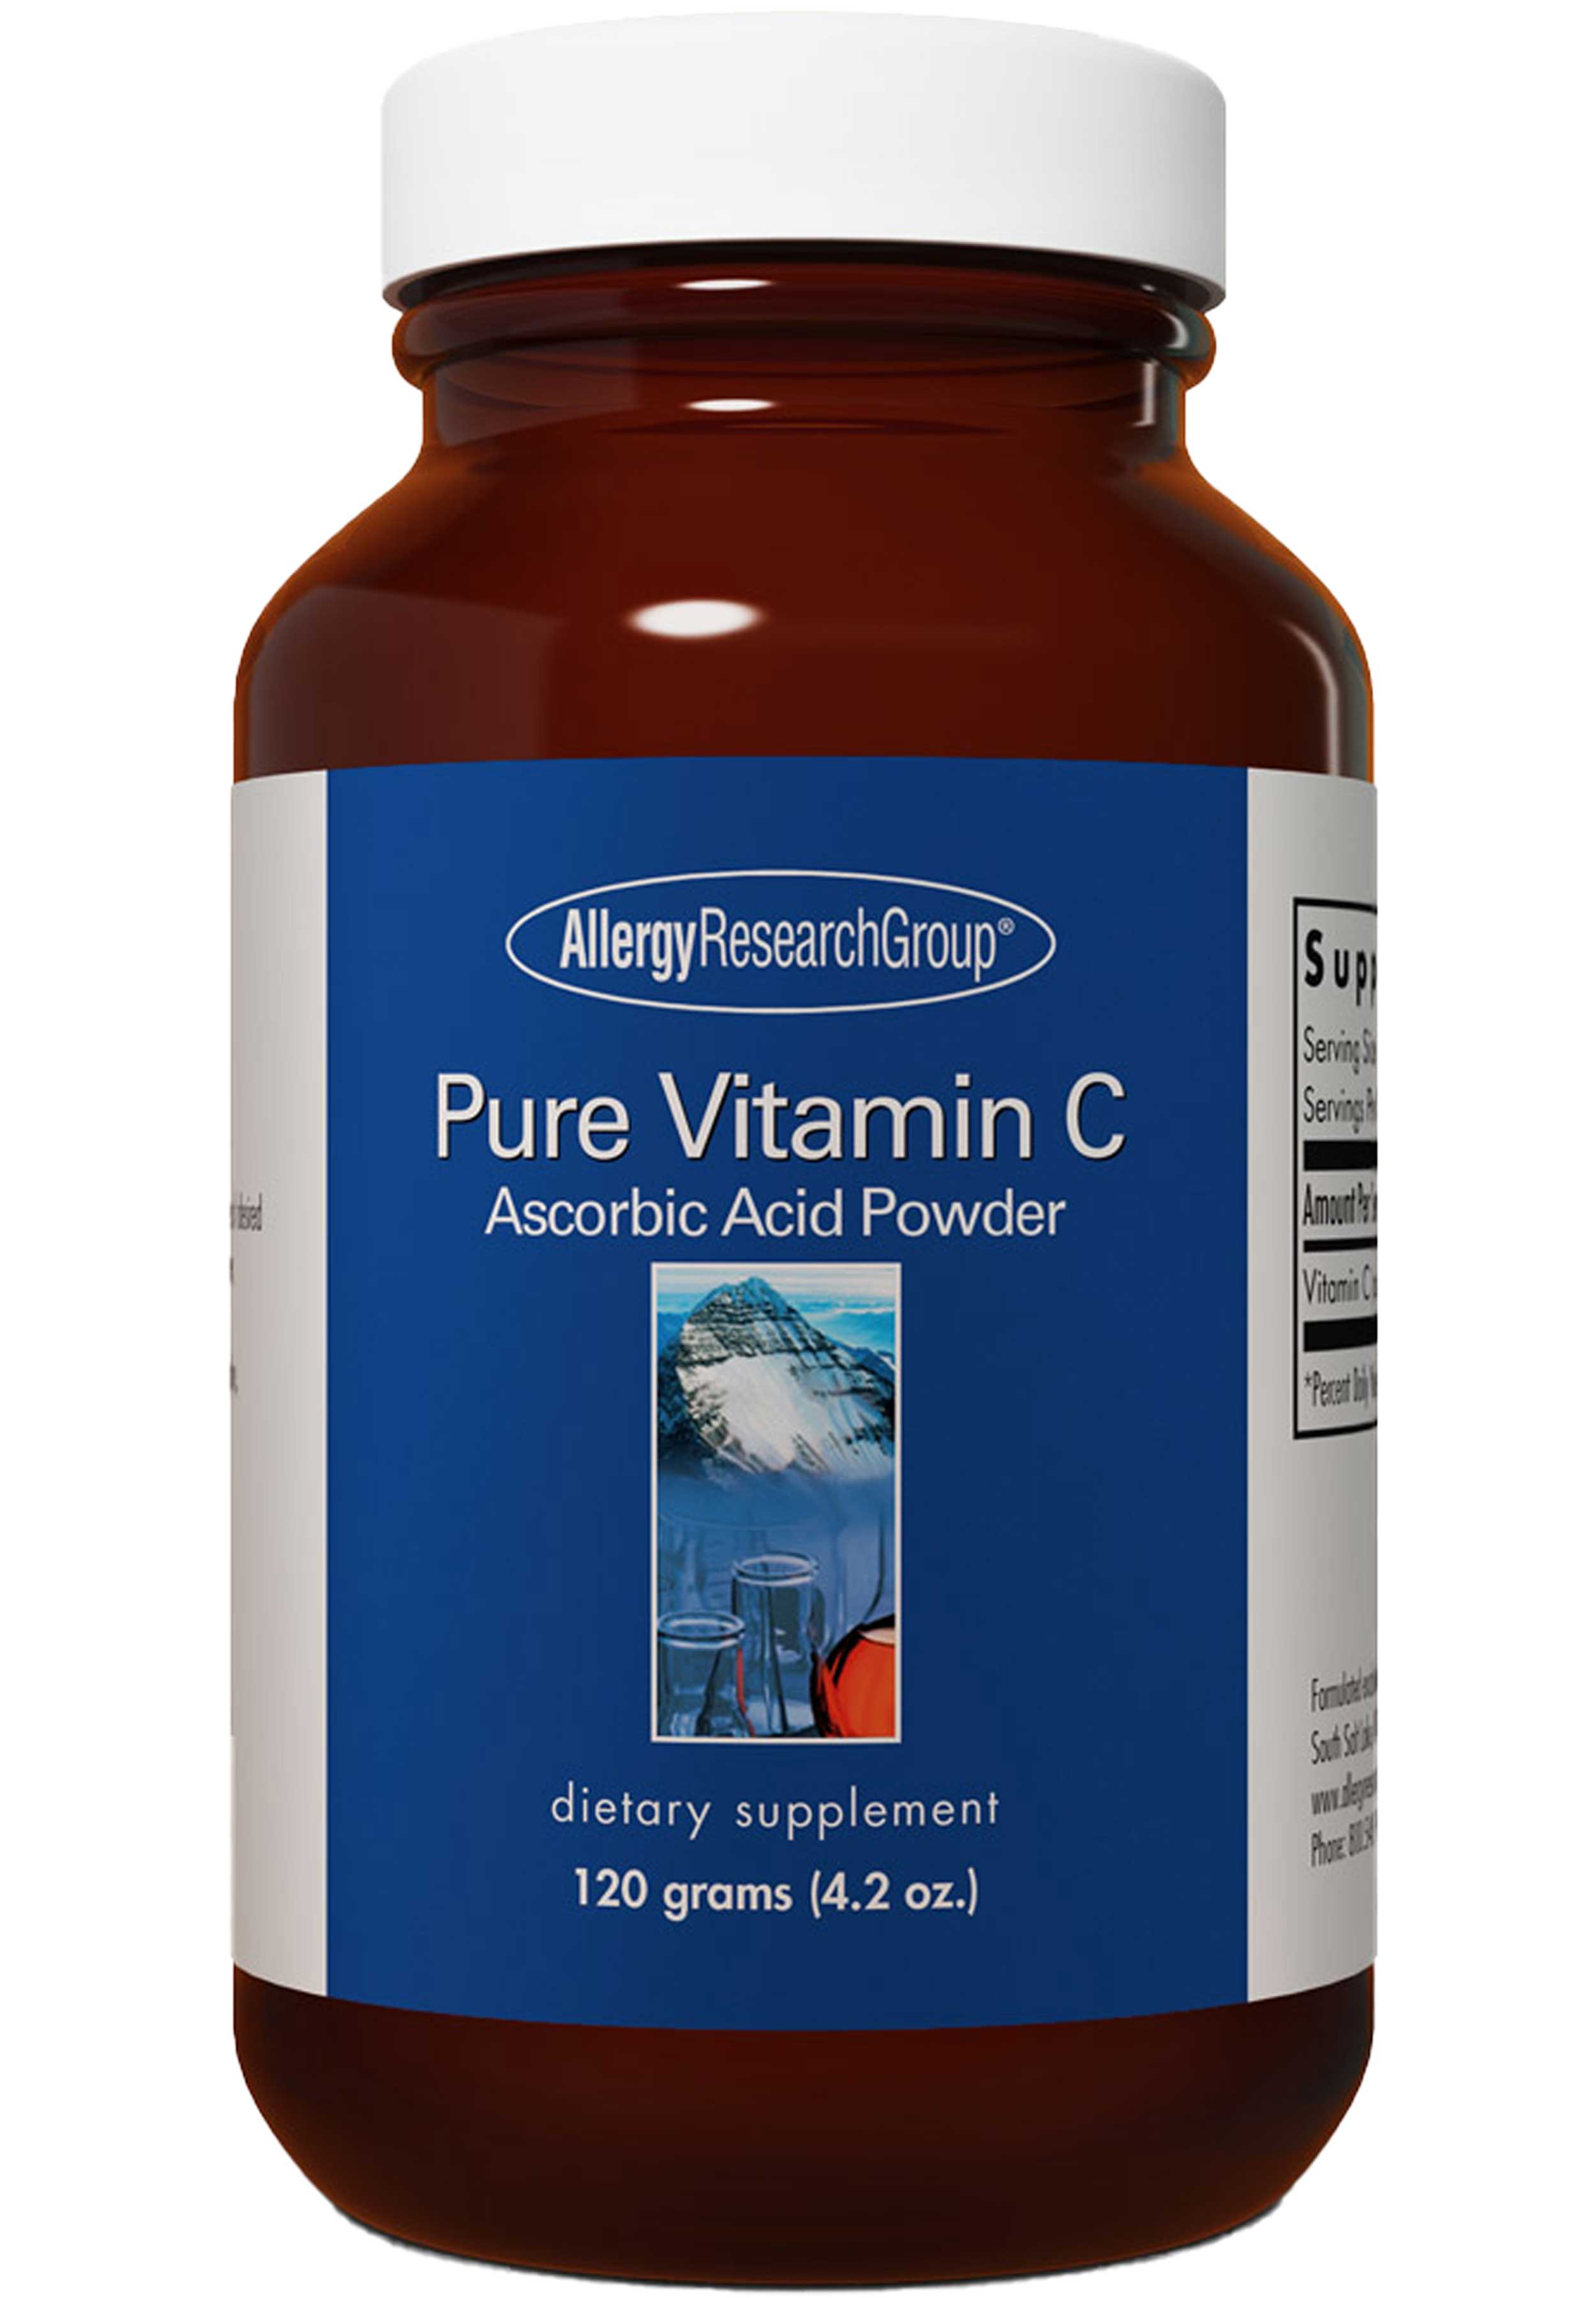 Allergy Research Group Pure Vitamin C